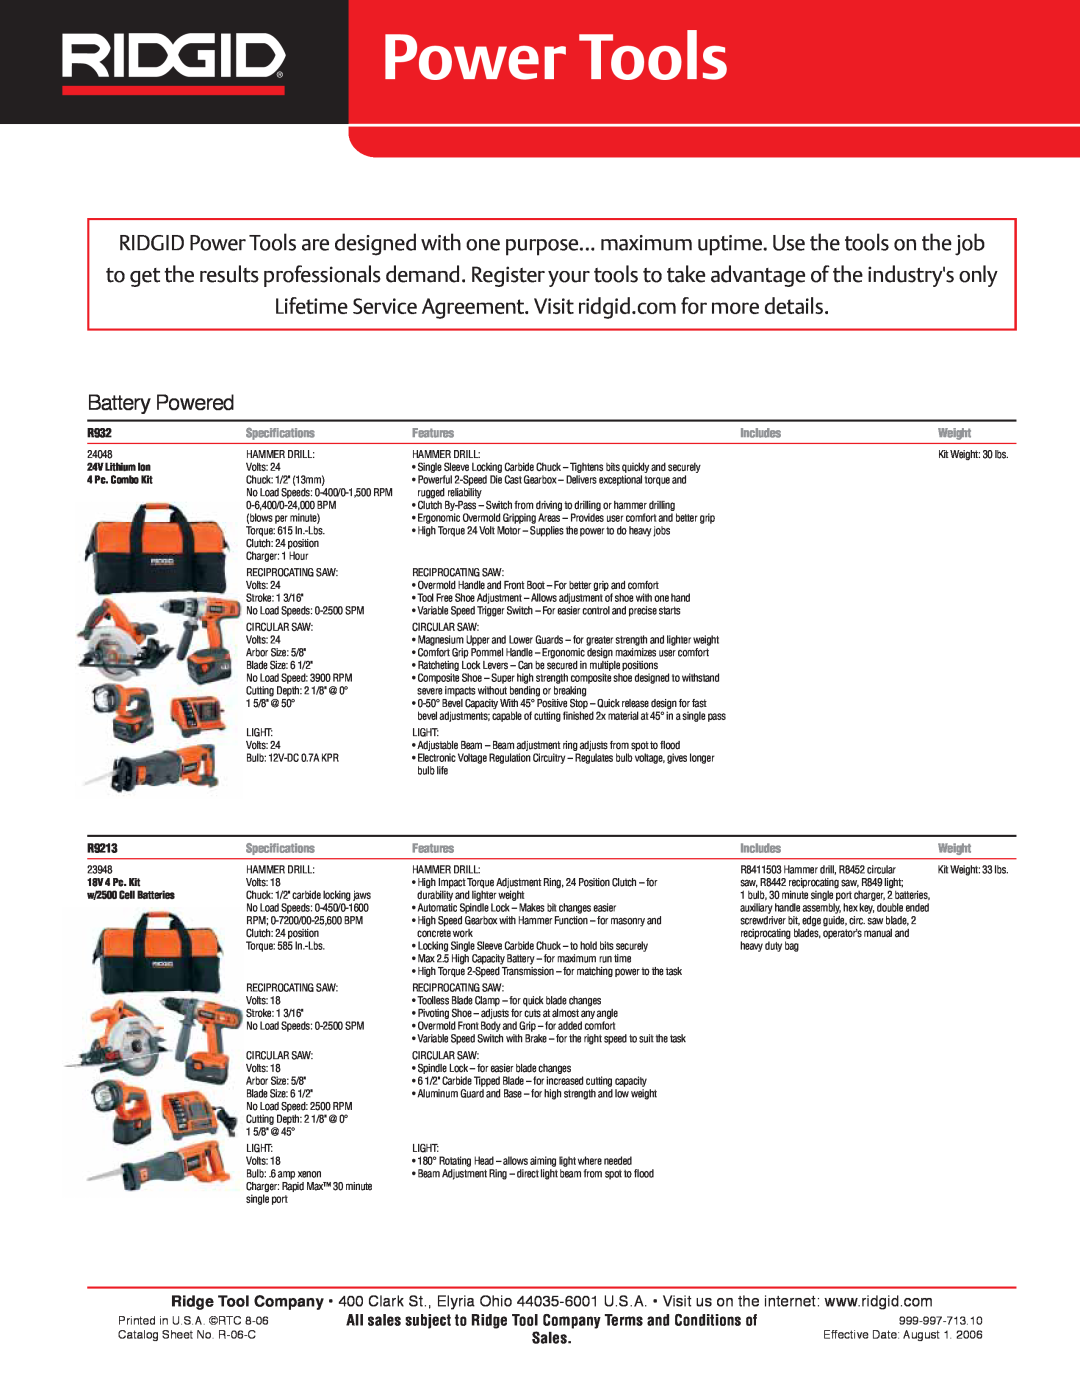 RIDGID R932 specifications Battery Powered, R9213, Power Tools, Sales, Printed in U.S.A. RTC 8-06 Catalog Sheet No. R-06-C 